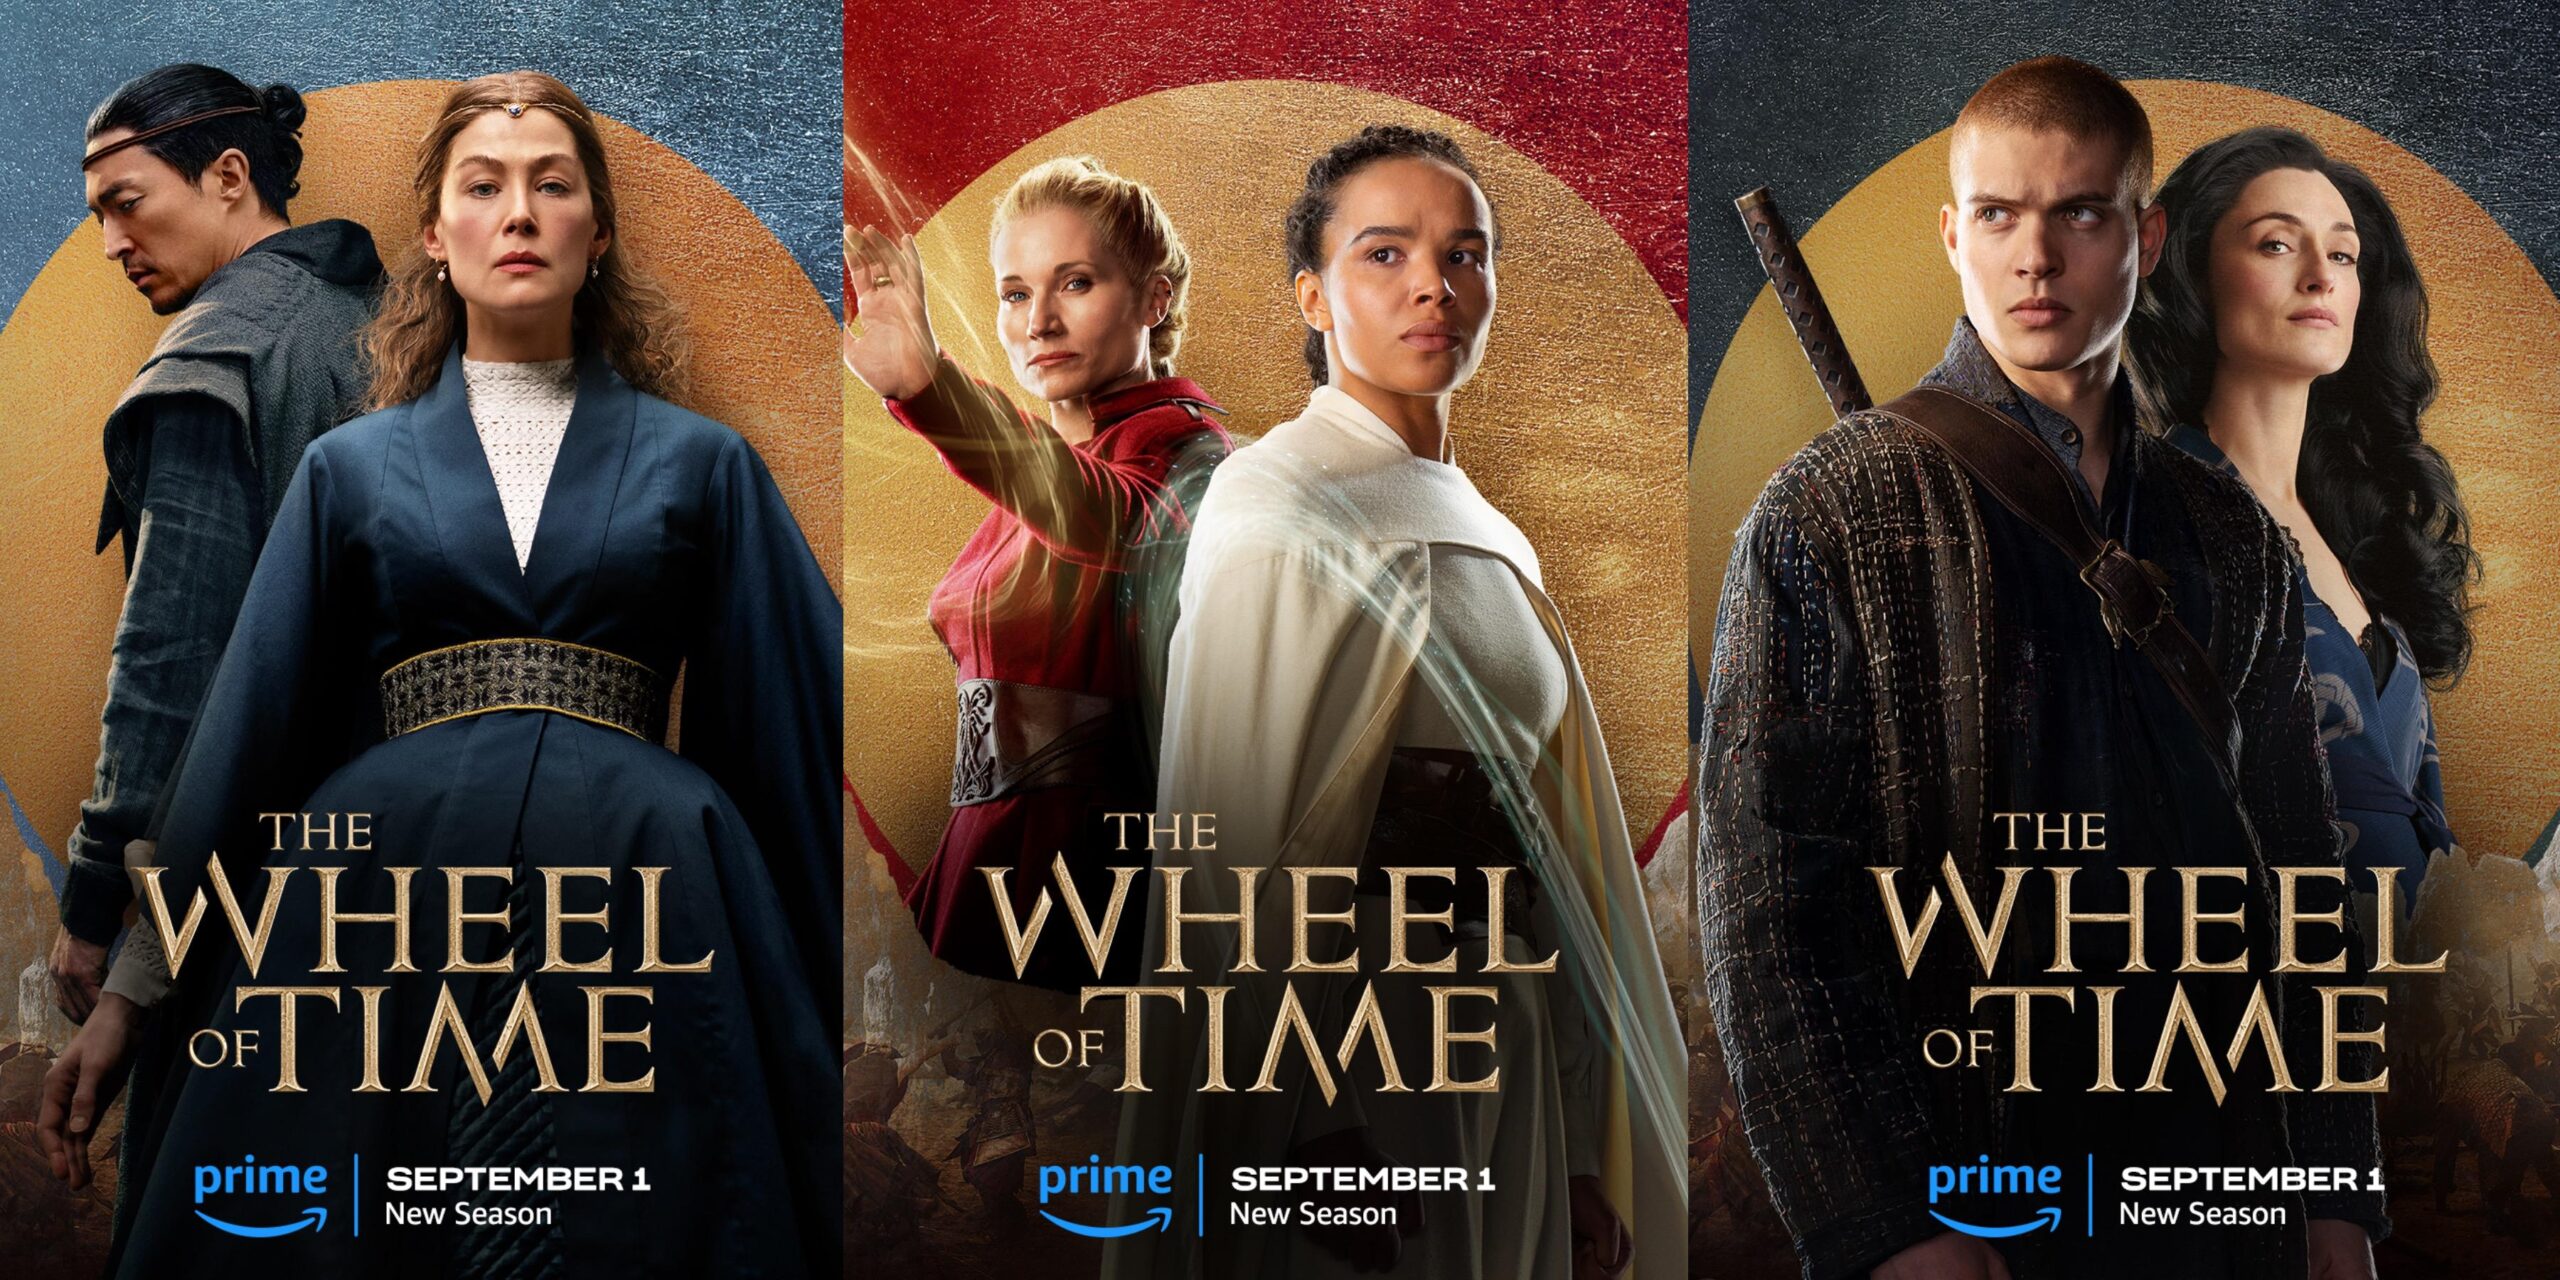 Prime Video: Seven New Character Posters for "The Wheel of Time"